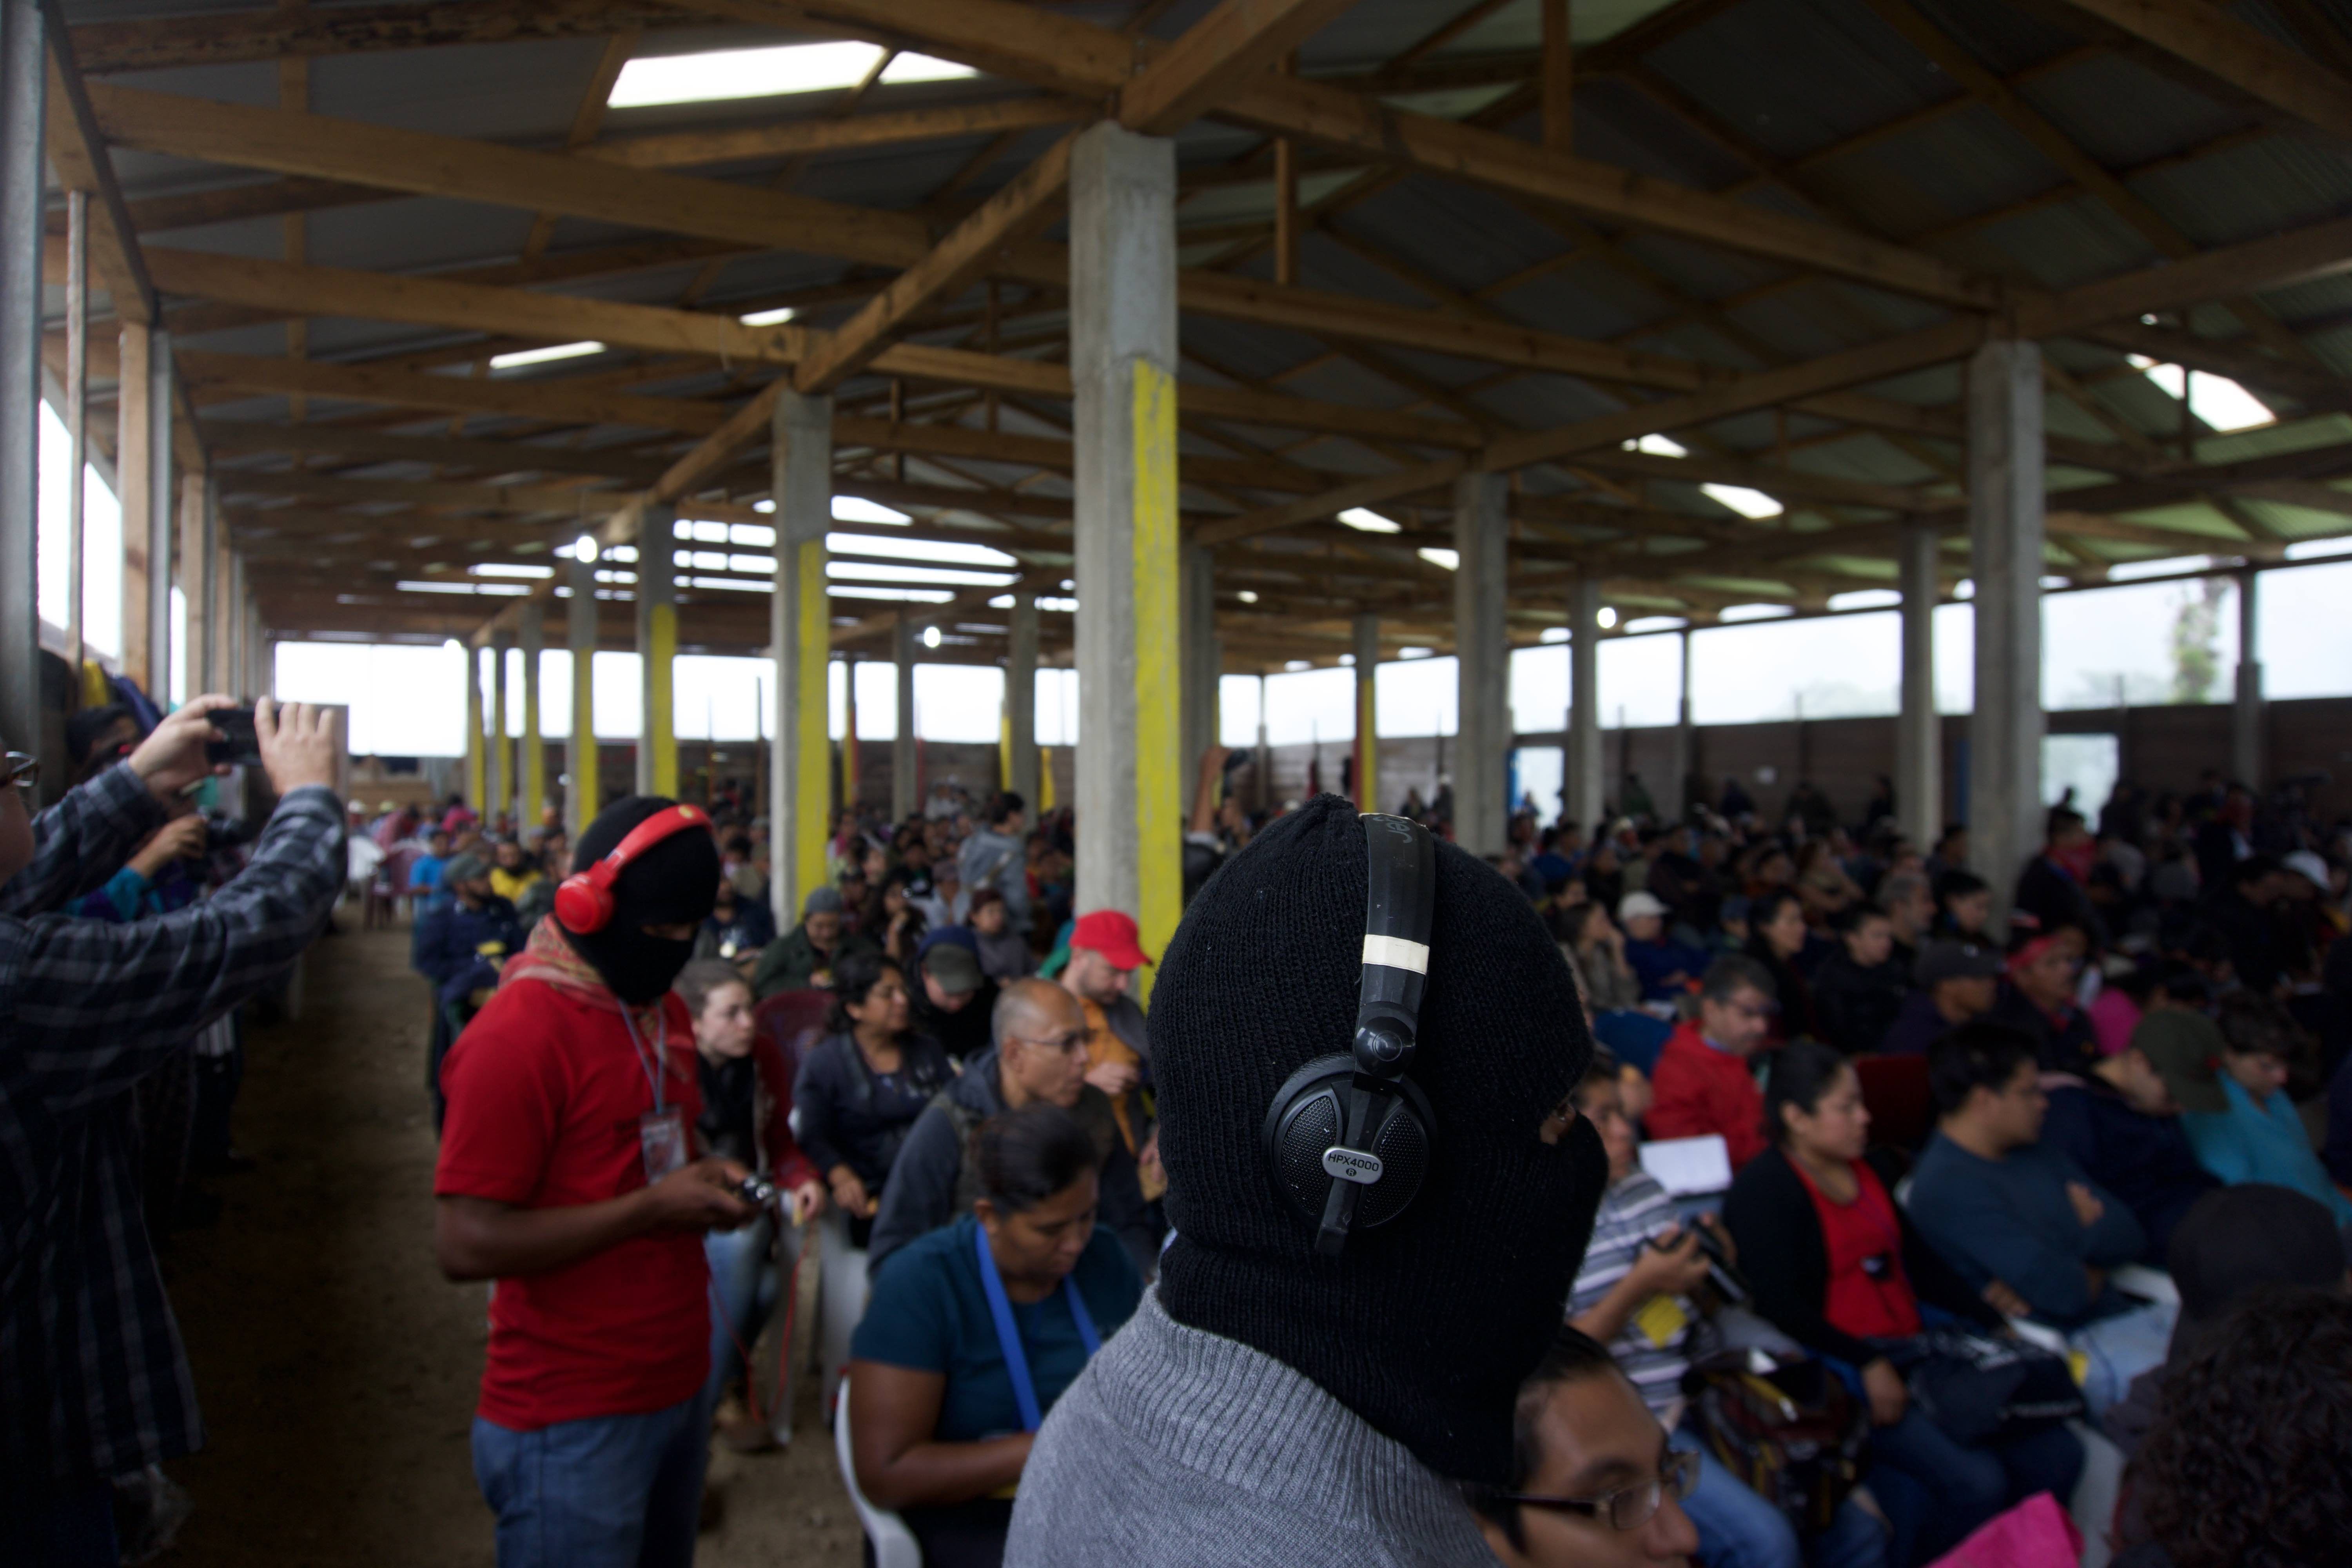 At the final meeting of a three-day-long “encuentro,” or political gathering, in the village of Morelia—deep in the Zapatista autonomous zones—participants filled a pavilion to listen to speeches summarizing the results of the previous day’s debates. Here, a Zapatista activist records the speech of Subcomandante Galeano, the de facto spokesman for the Zapatistas. Image by Jared Olson. Mexico, 2018.